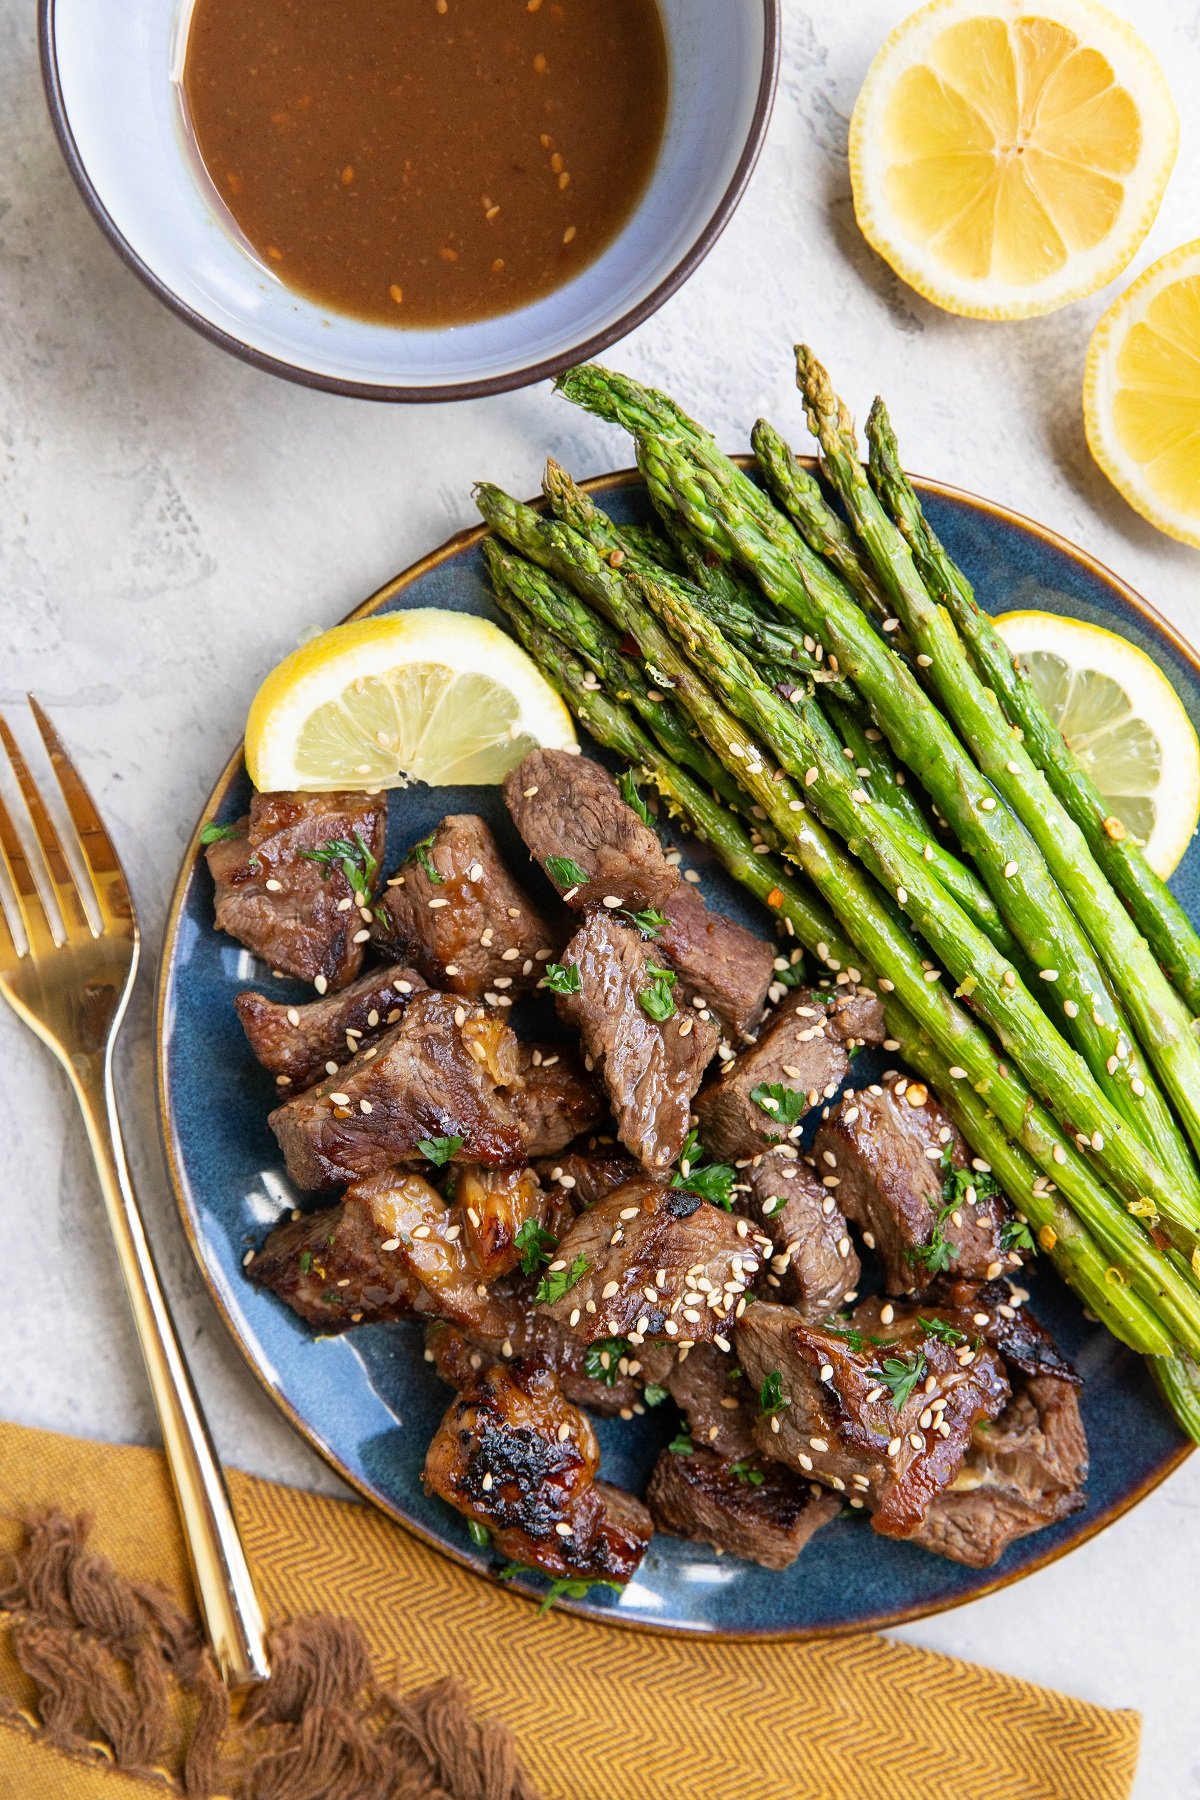 Blue plate of steak bites and asparagus, ready to serve. a bowl of teriyaki sauce to the side and fresh lemons. gold fork and napkin.